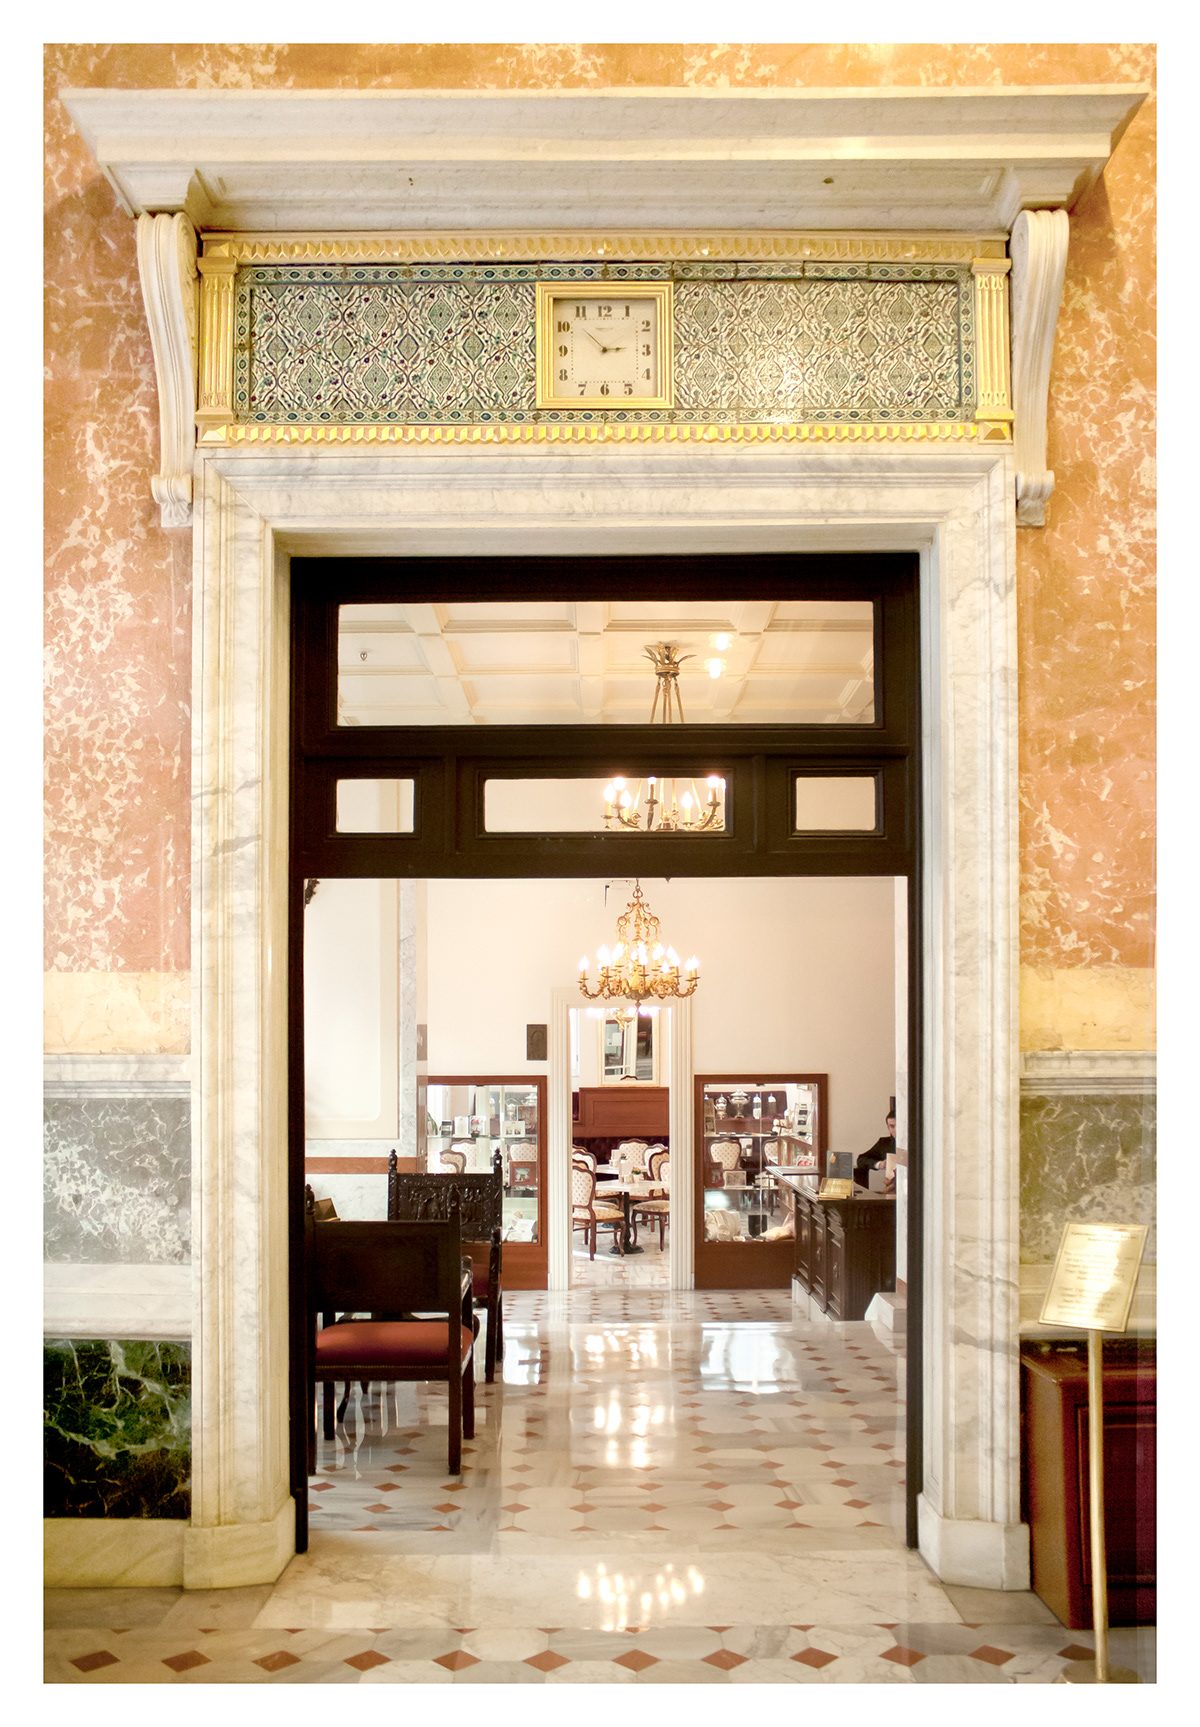 architectural photography  Istanbul hotel Interior  exterior